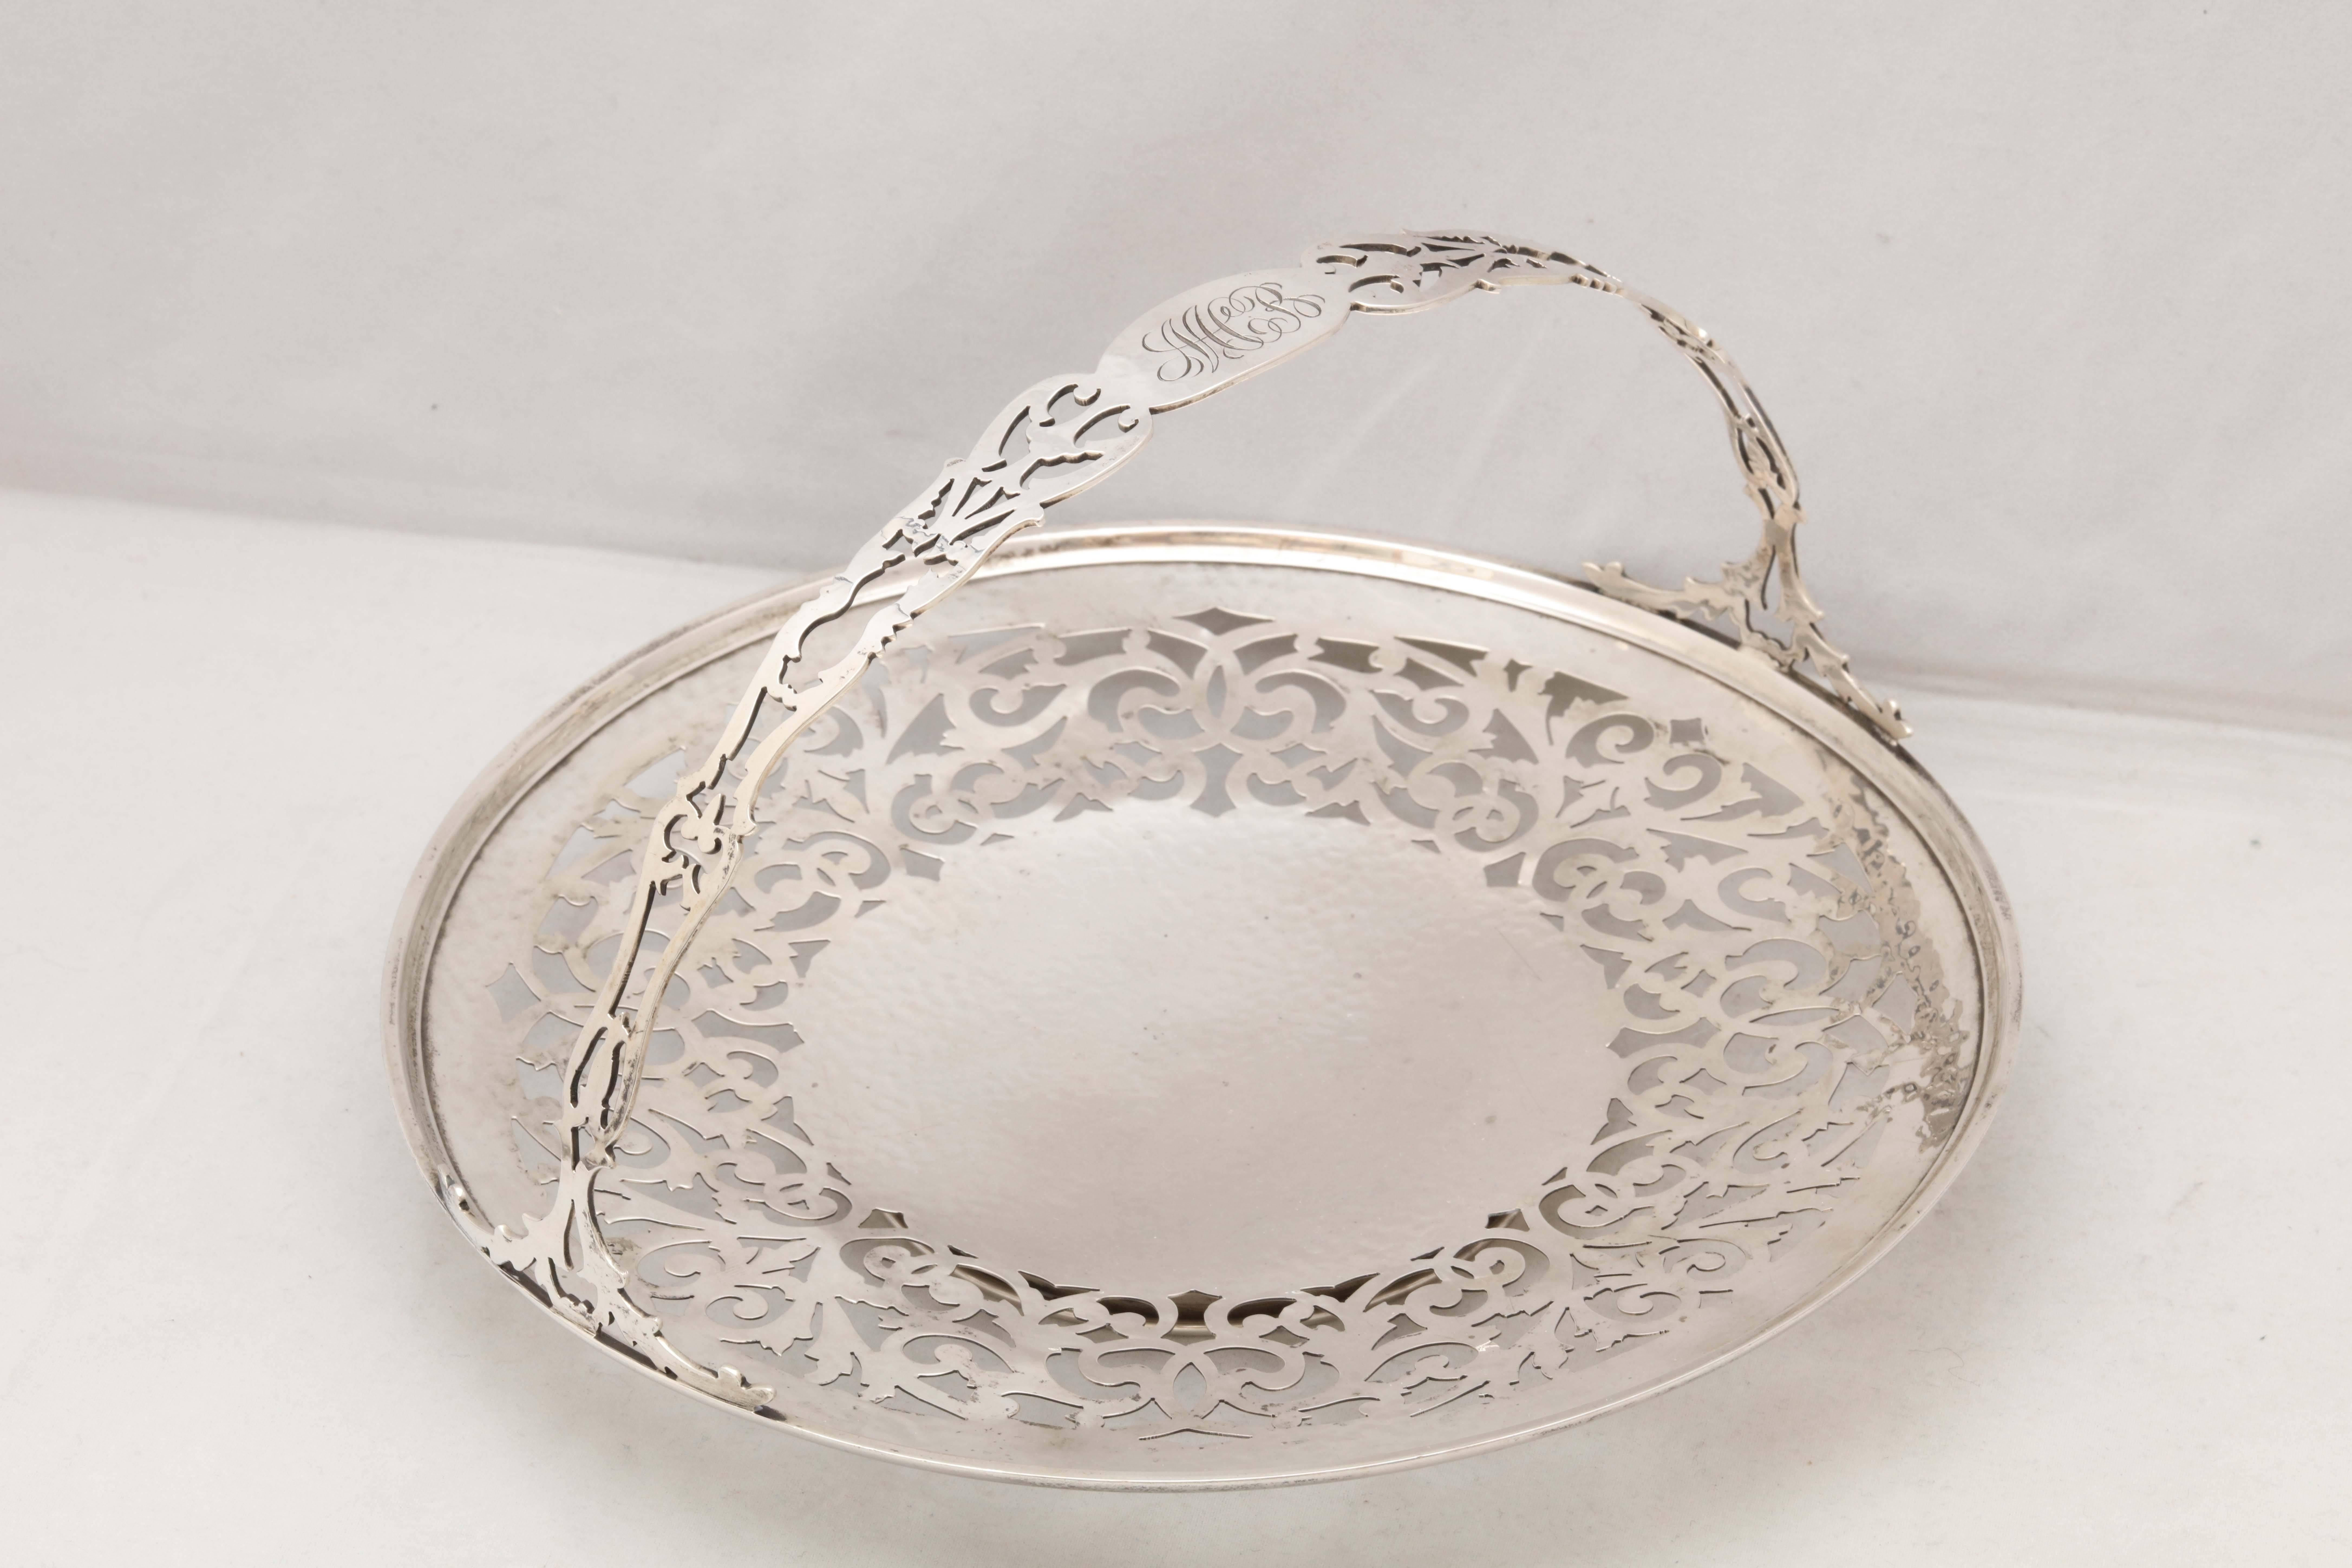 Lovely, sterling silver, Edwardian-style, cake basket on pedestal base, Gorham Manufacturing Co., Providence, Rhode Island, year-marked for 1916. Beautiful pierced work. Silver is lightly hand-hammered. Handle is monogrammed 